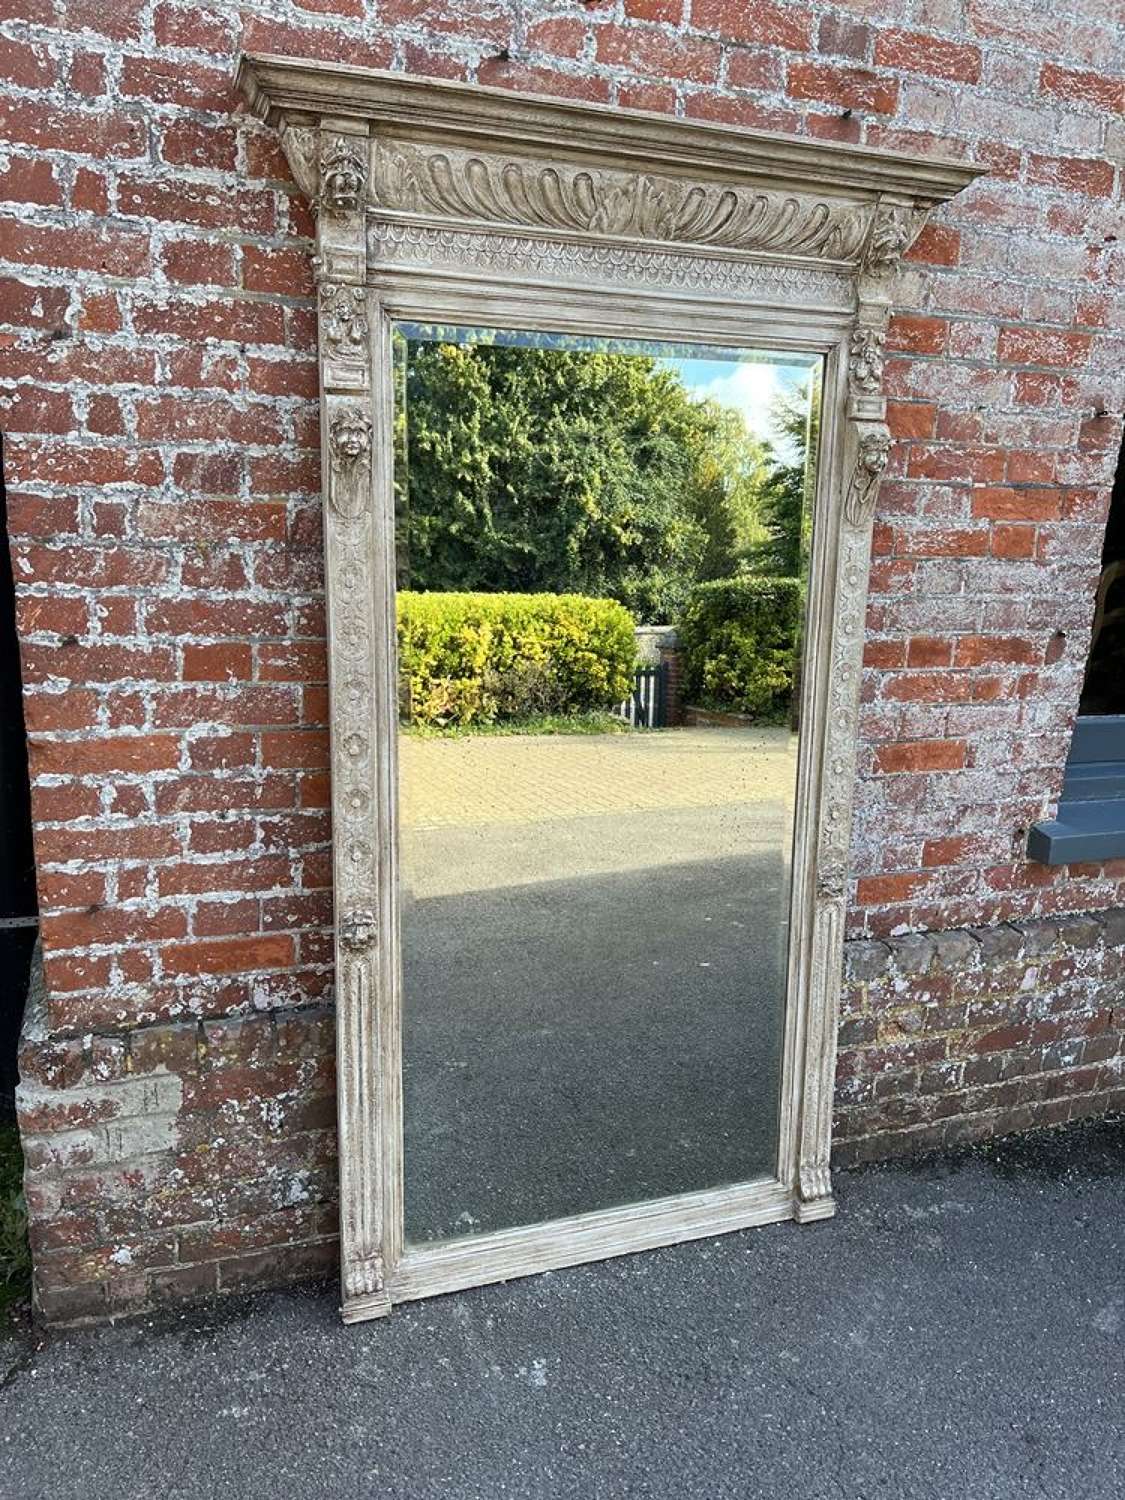 A Superb large Antique French 19th C carved wood painted Mirror.